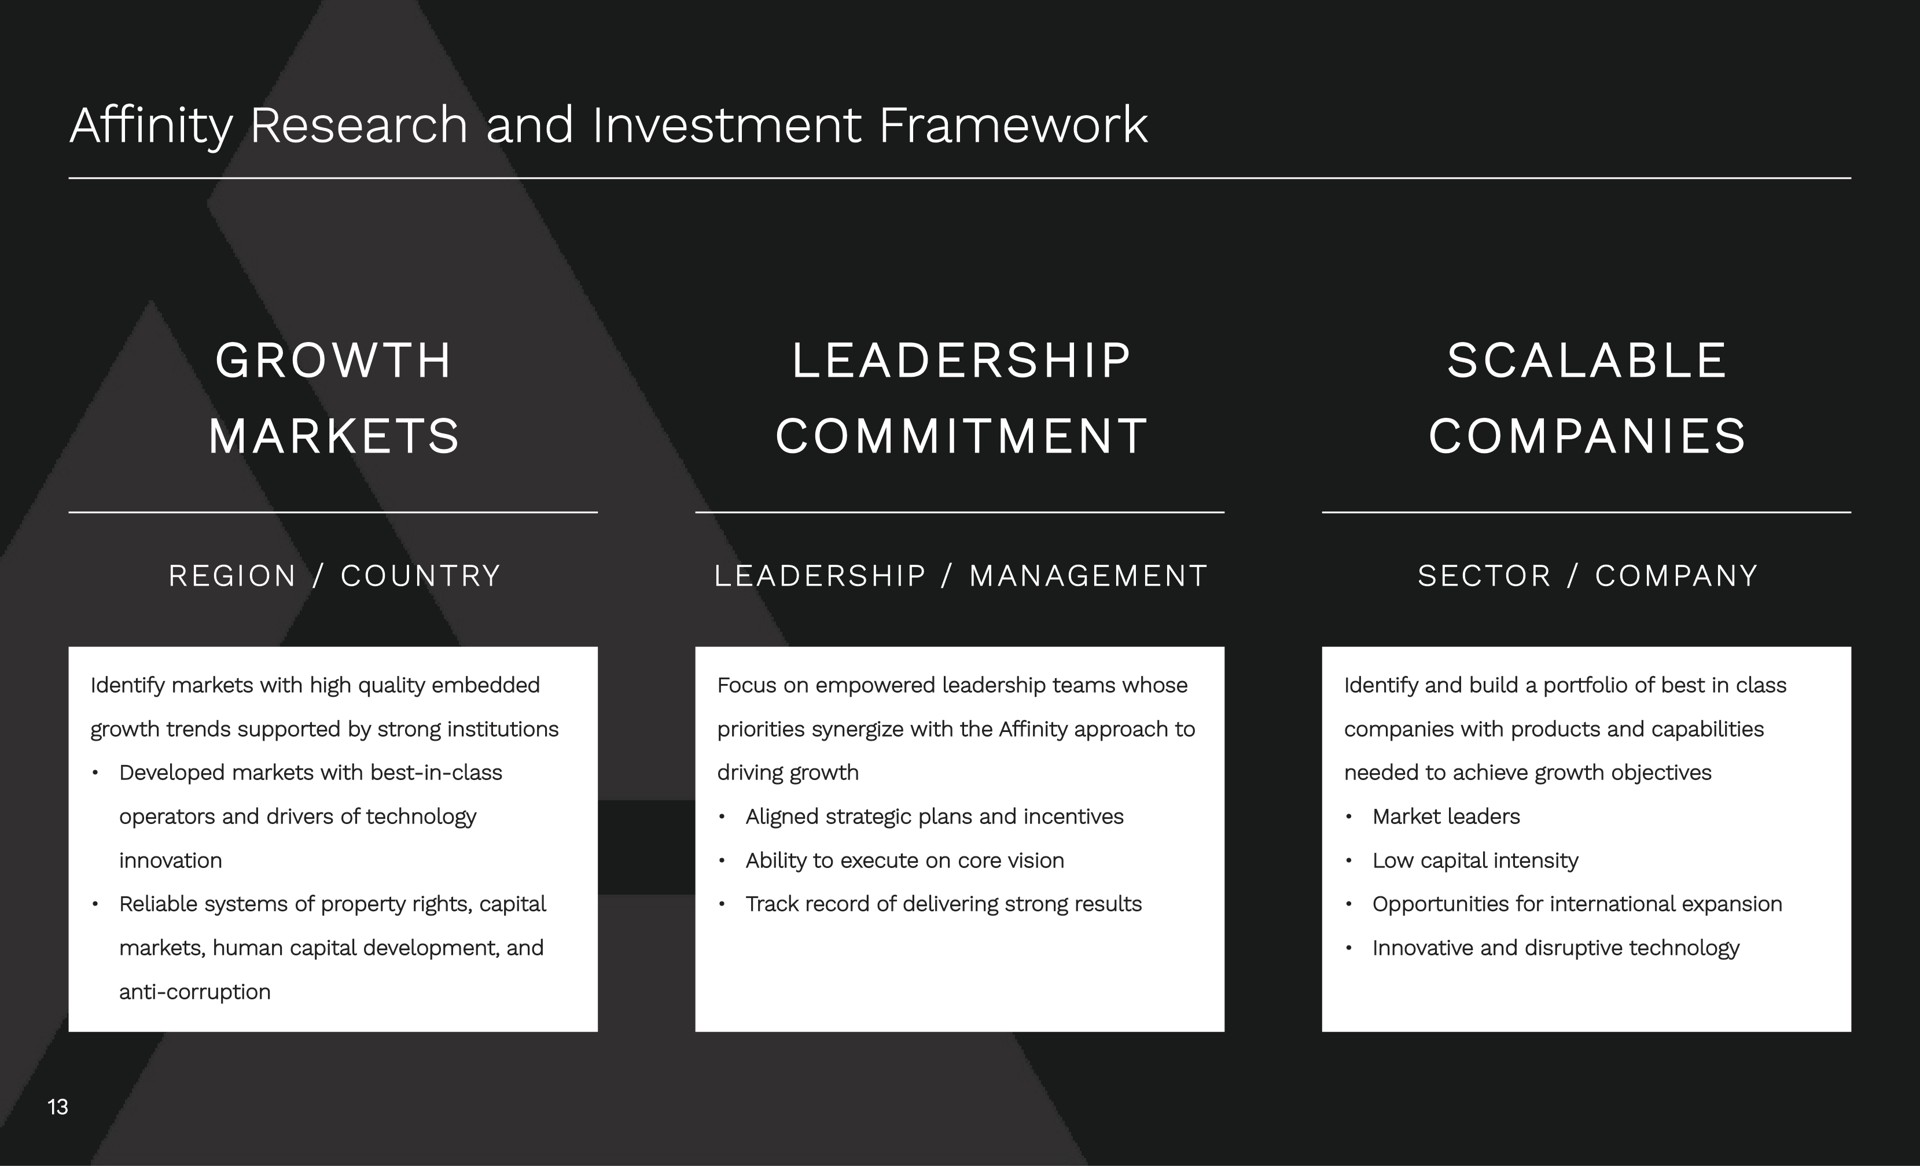 affinity research and investment framework affinity research and investment framework growth growth mar mar commitment commitment scalable scalable companies companies markets leadership | Affinity Partners